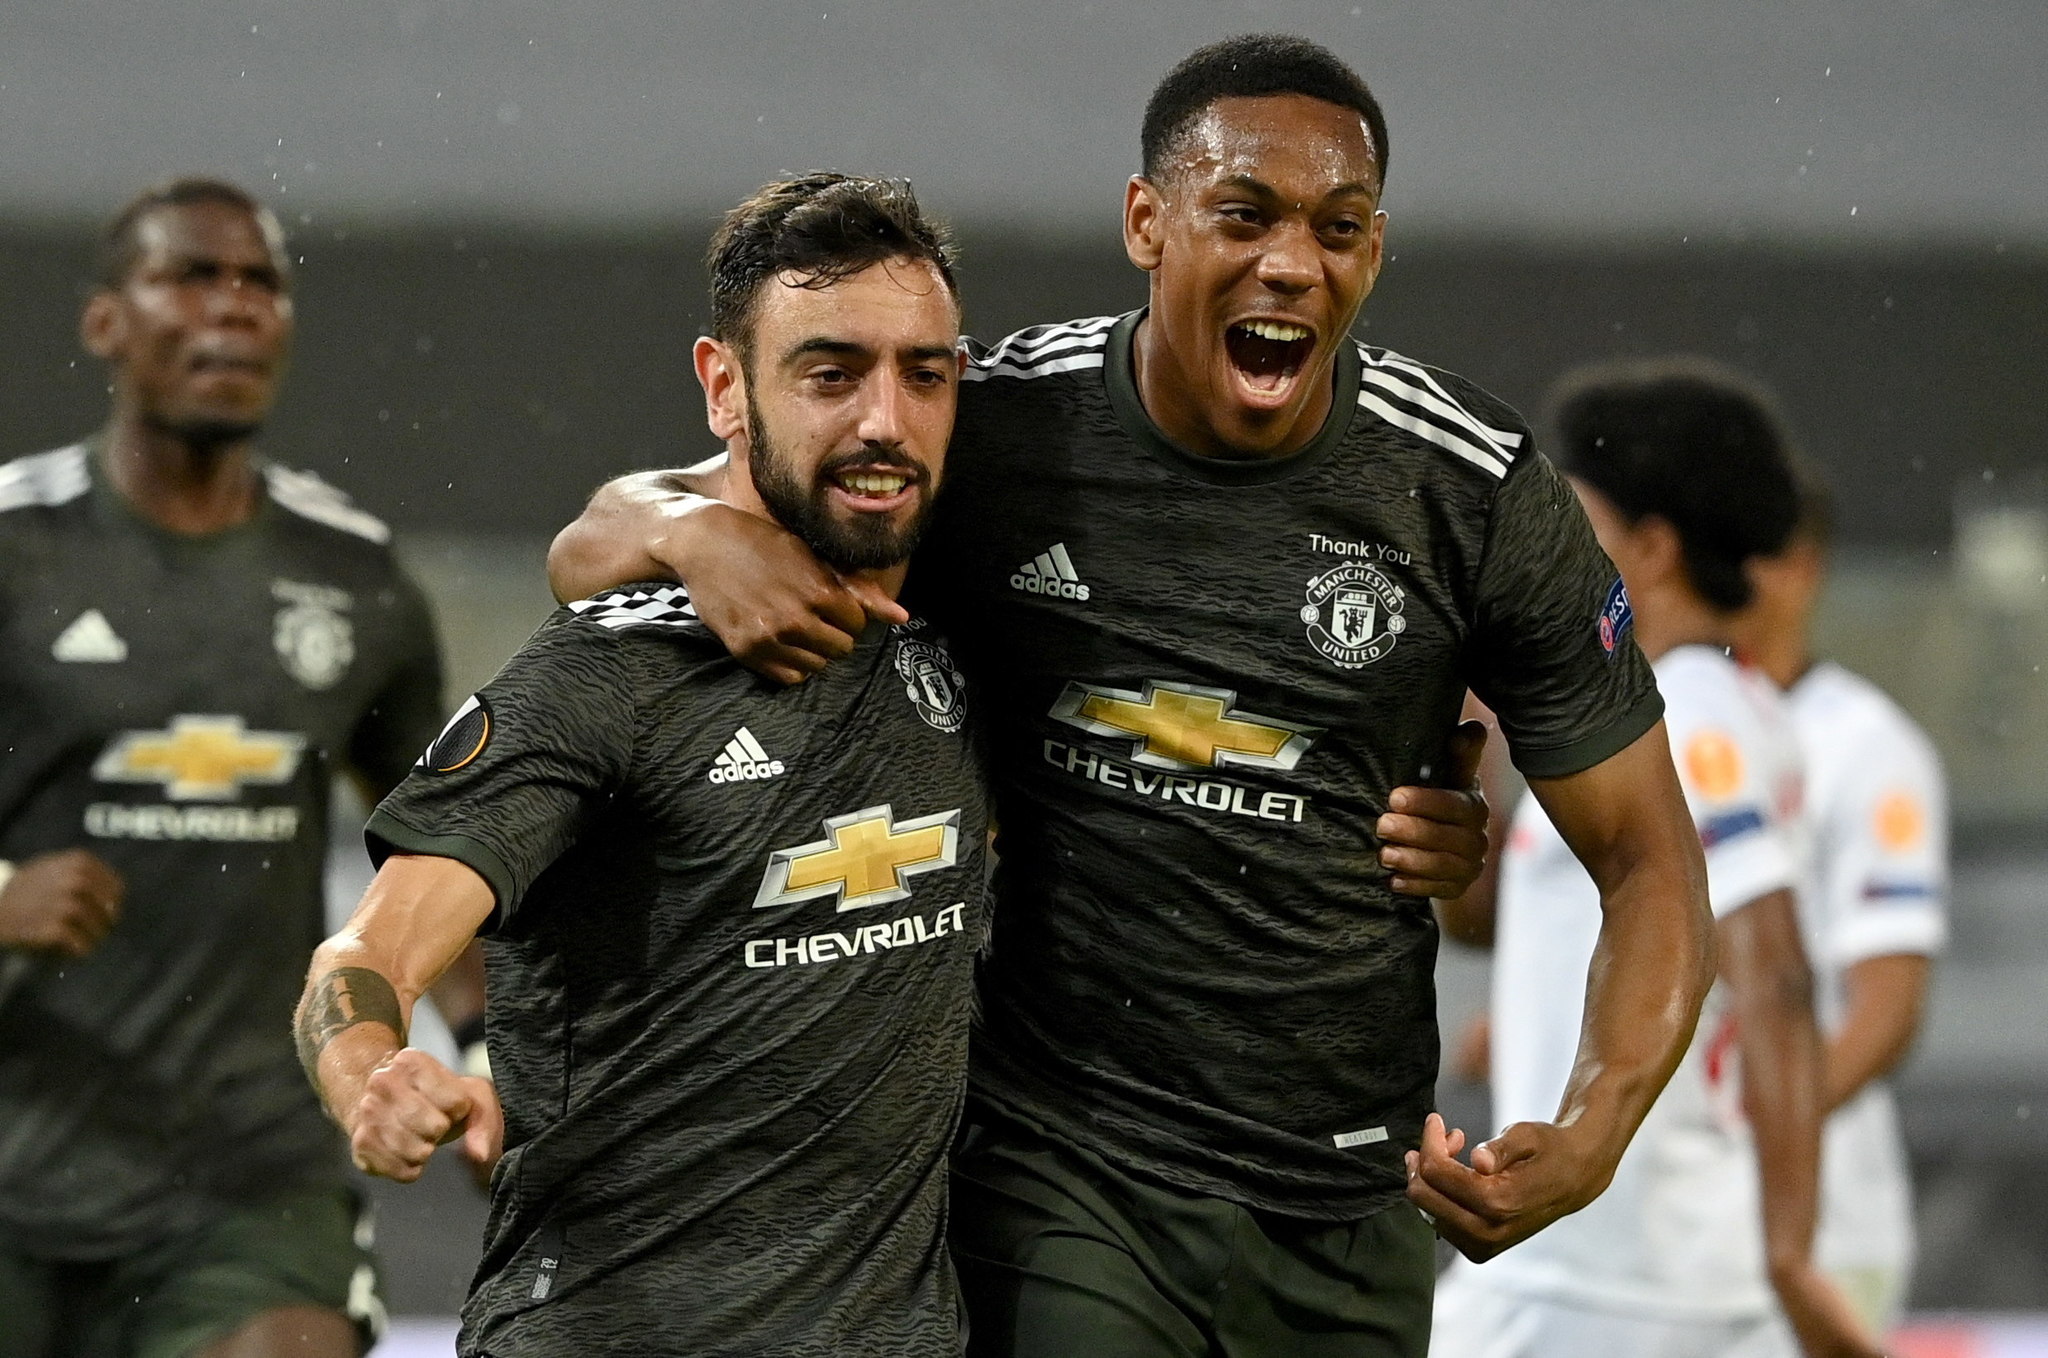 Cologne (Germany), 16/08/2020.- Bruno Fernandes of Manchester United celebrates scoring the 1-0 by penalty with Anthony Martial (R) during the UEFA Europa League semi final match between lt;HIT gt;Sevilla lt;/HIT gt; FC and Manchester United in Cologne, Germany 16 August 2020. (Alemania, Colonia) EFE/EPA/Ina Fassbender / POOL